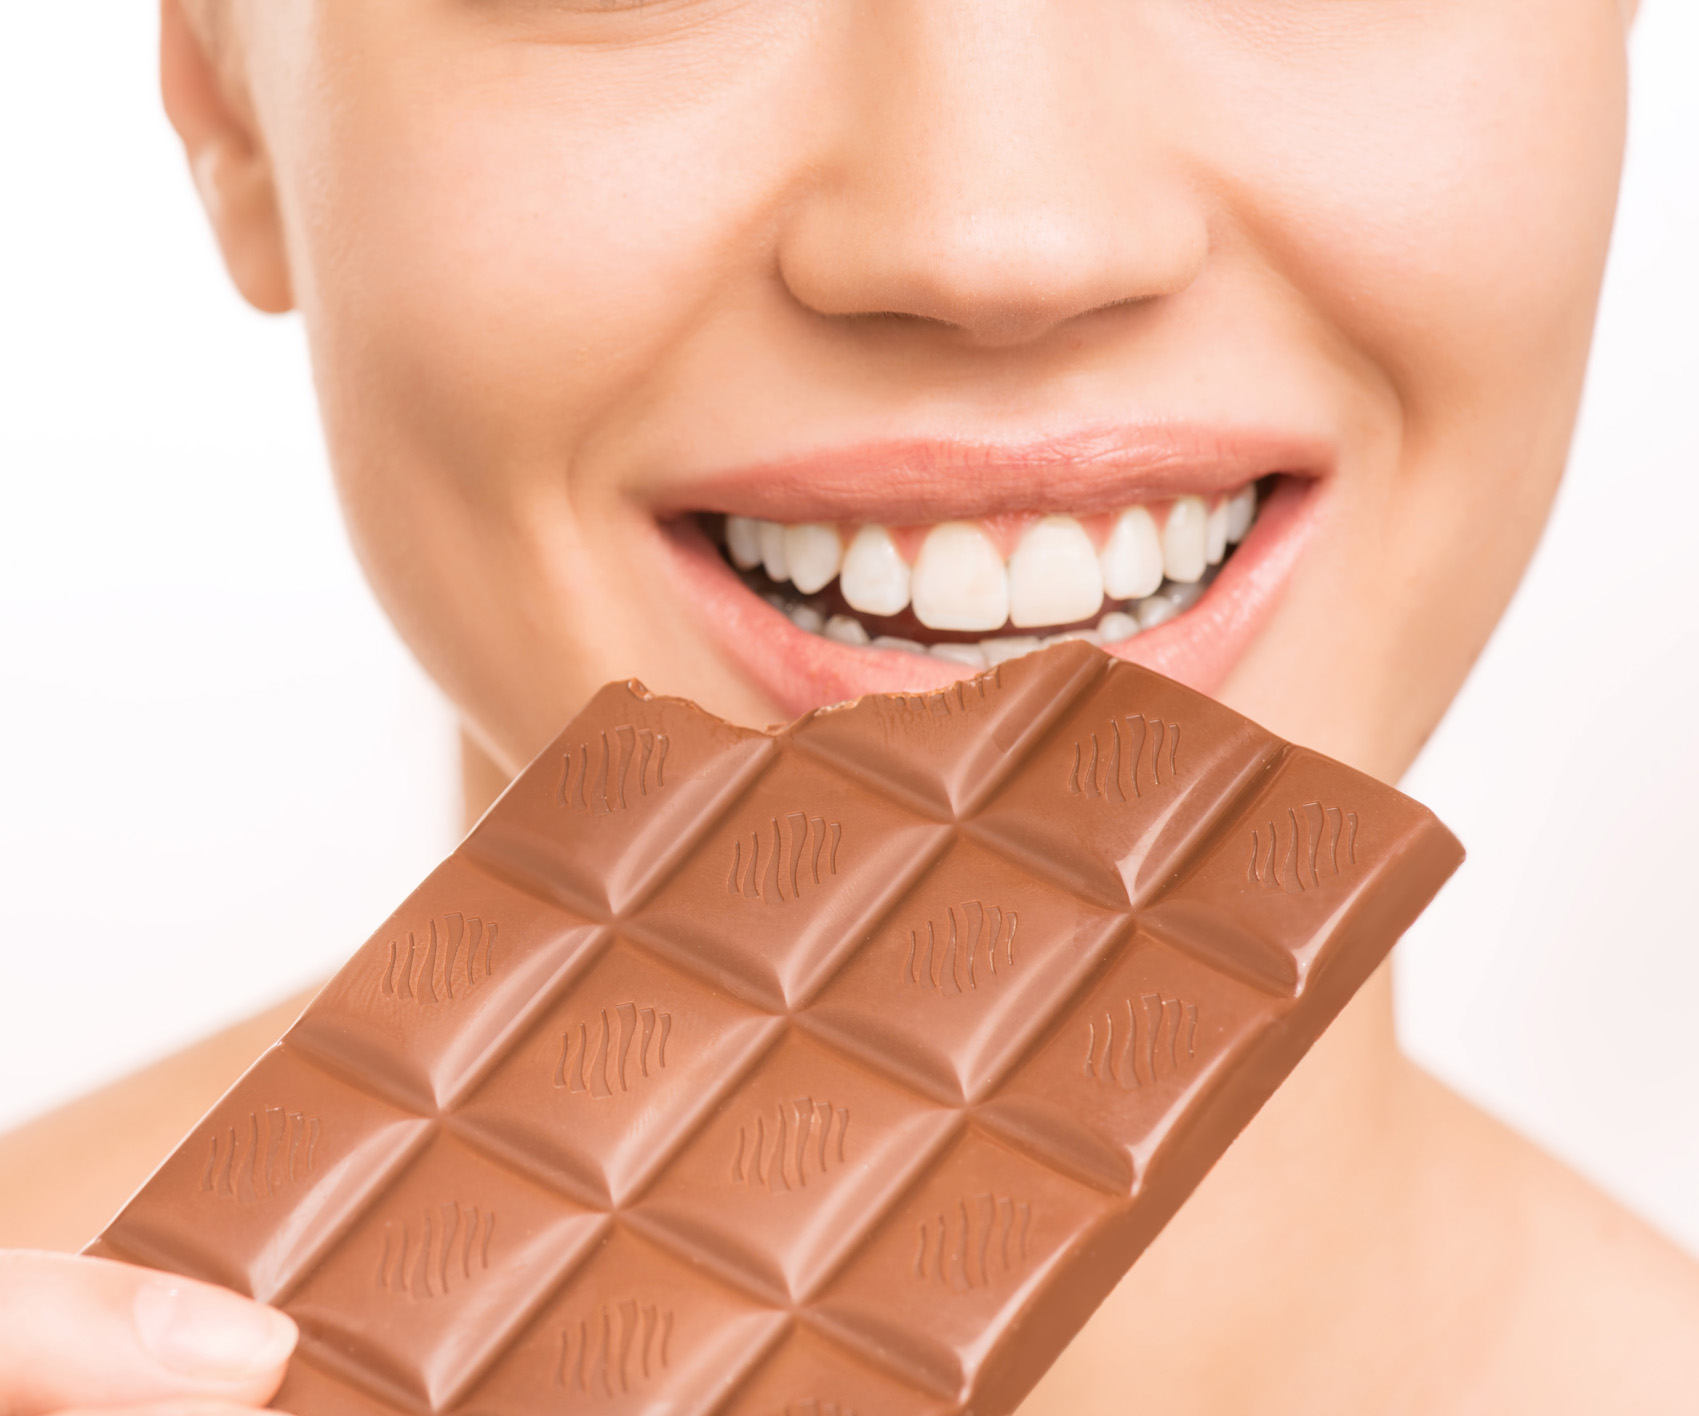 Eating chocolate ‘improves brain function’